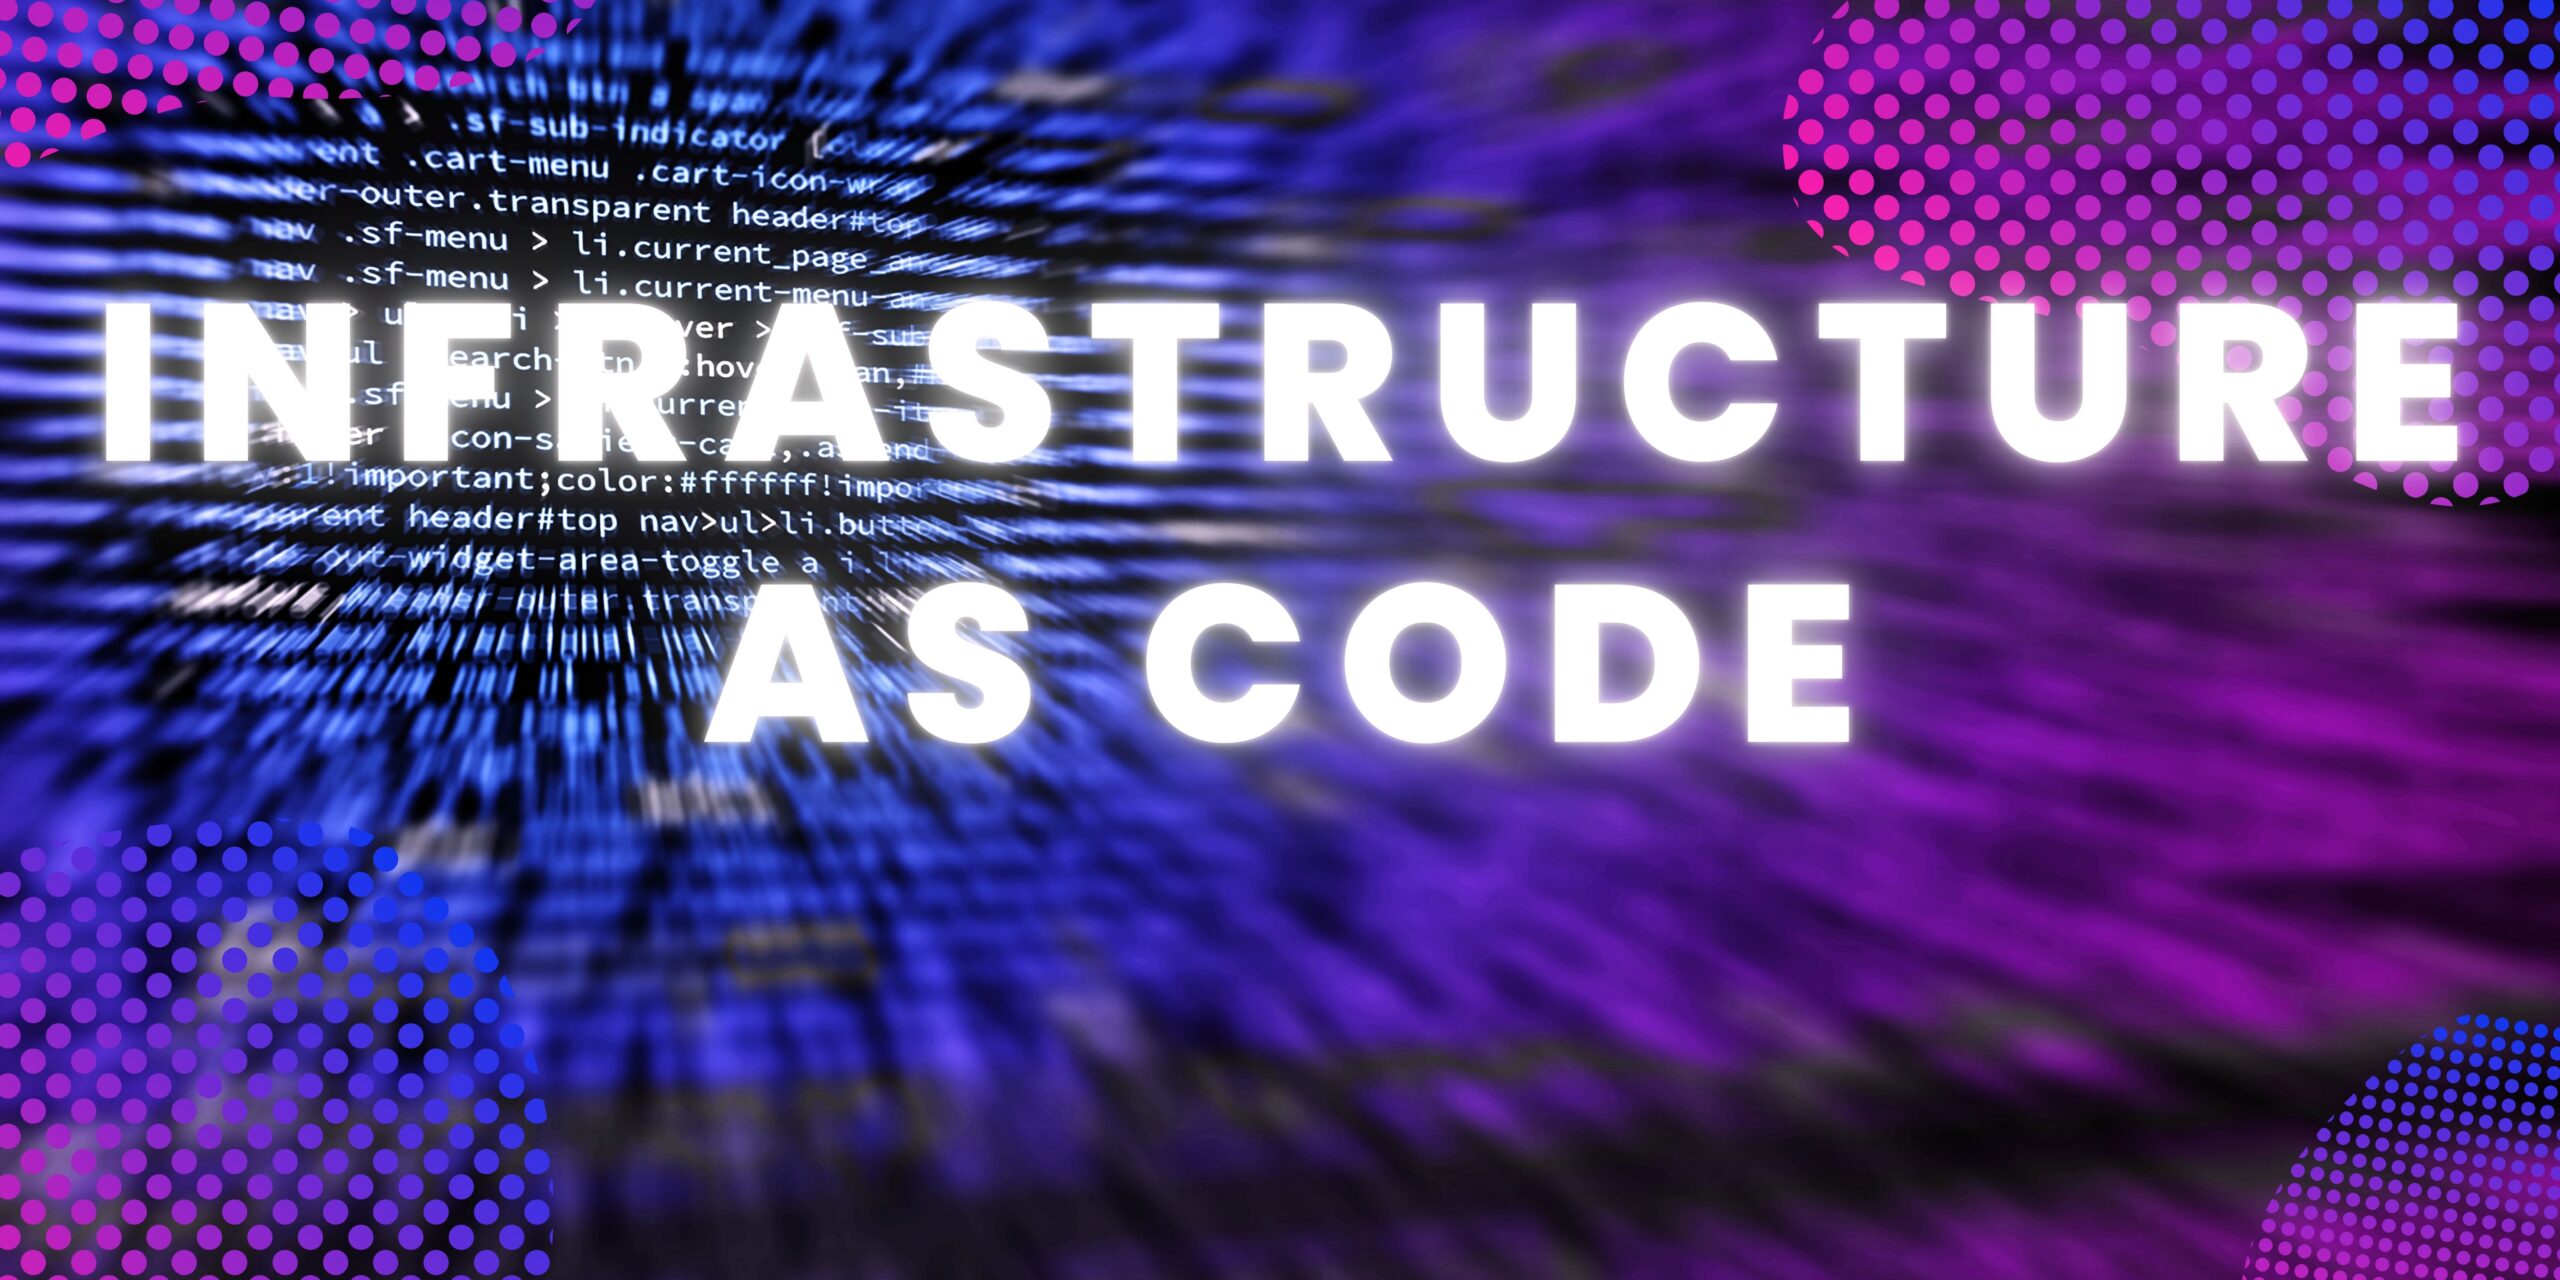 Infrastructure as code